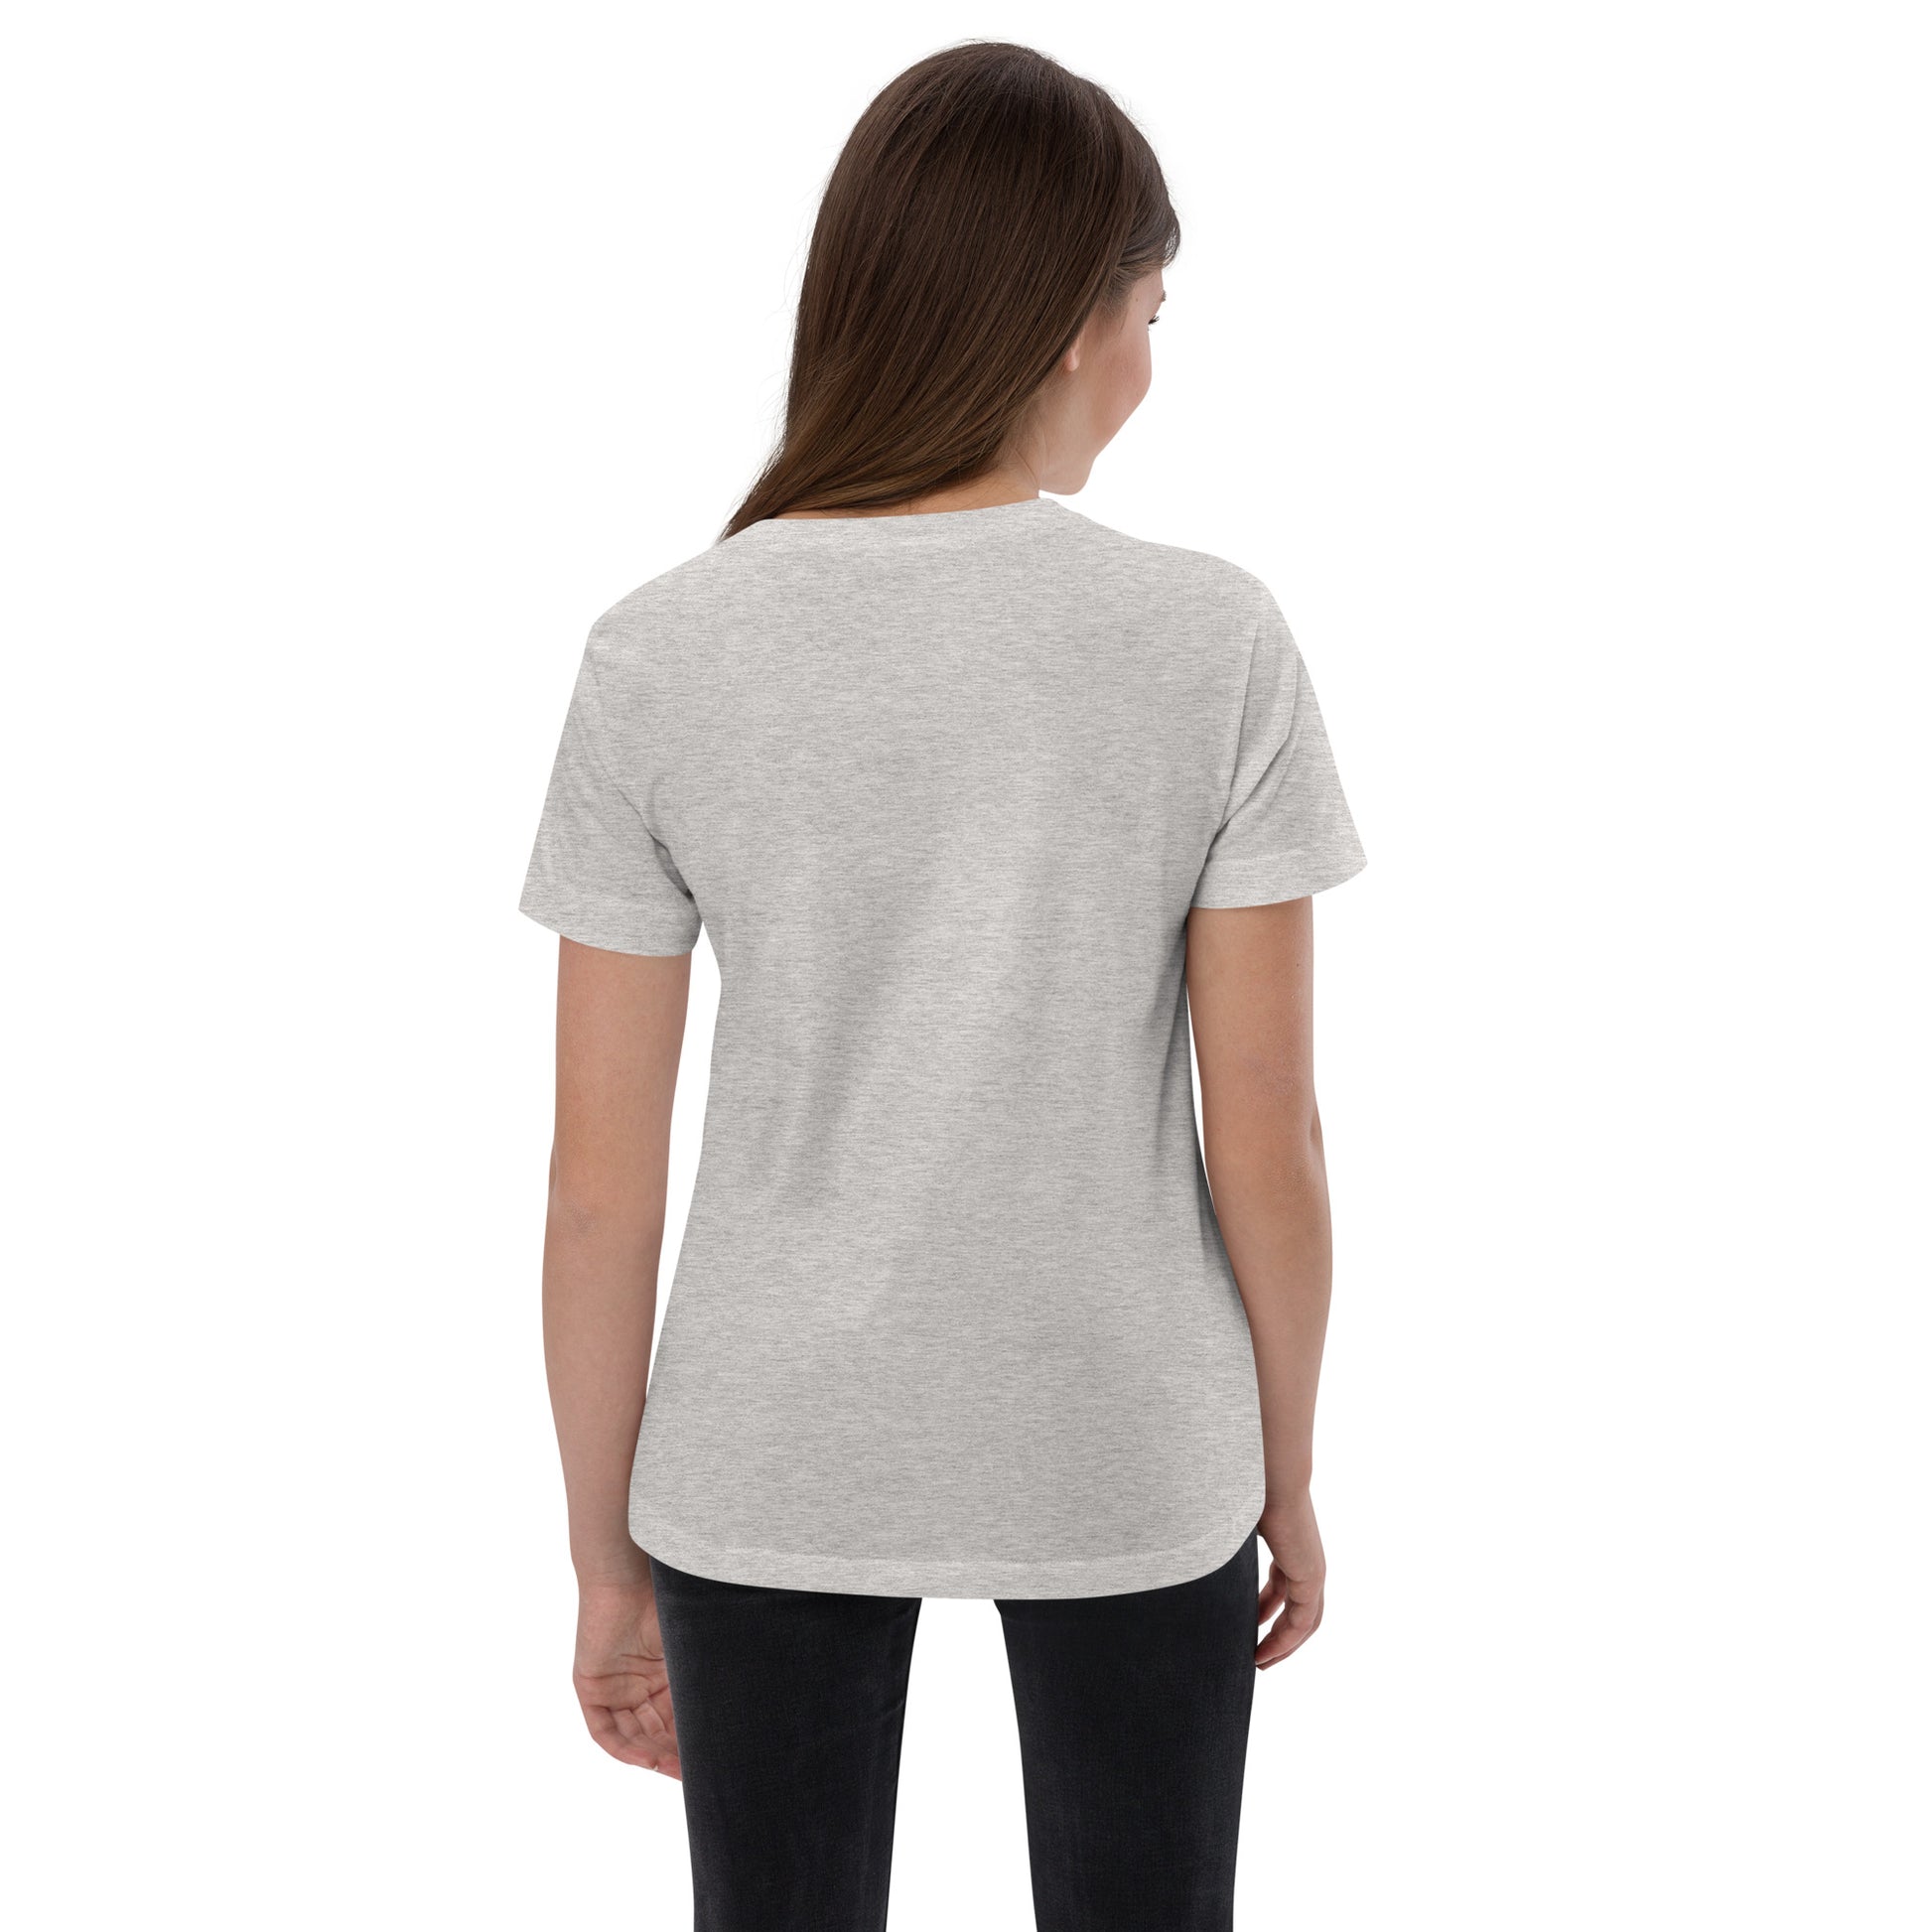  Kids T-Shirt - Natural / Heather colour - Back view, being warn on a girl standing with her arms by her side - Go Sea Kayak Byron Bay Crew (issue 2018-2019) logo on front - Genuine Byron Bay Merchandise | Produced by Go Sea Kayak Byron Bay 